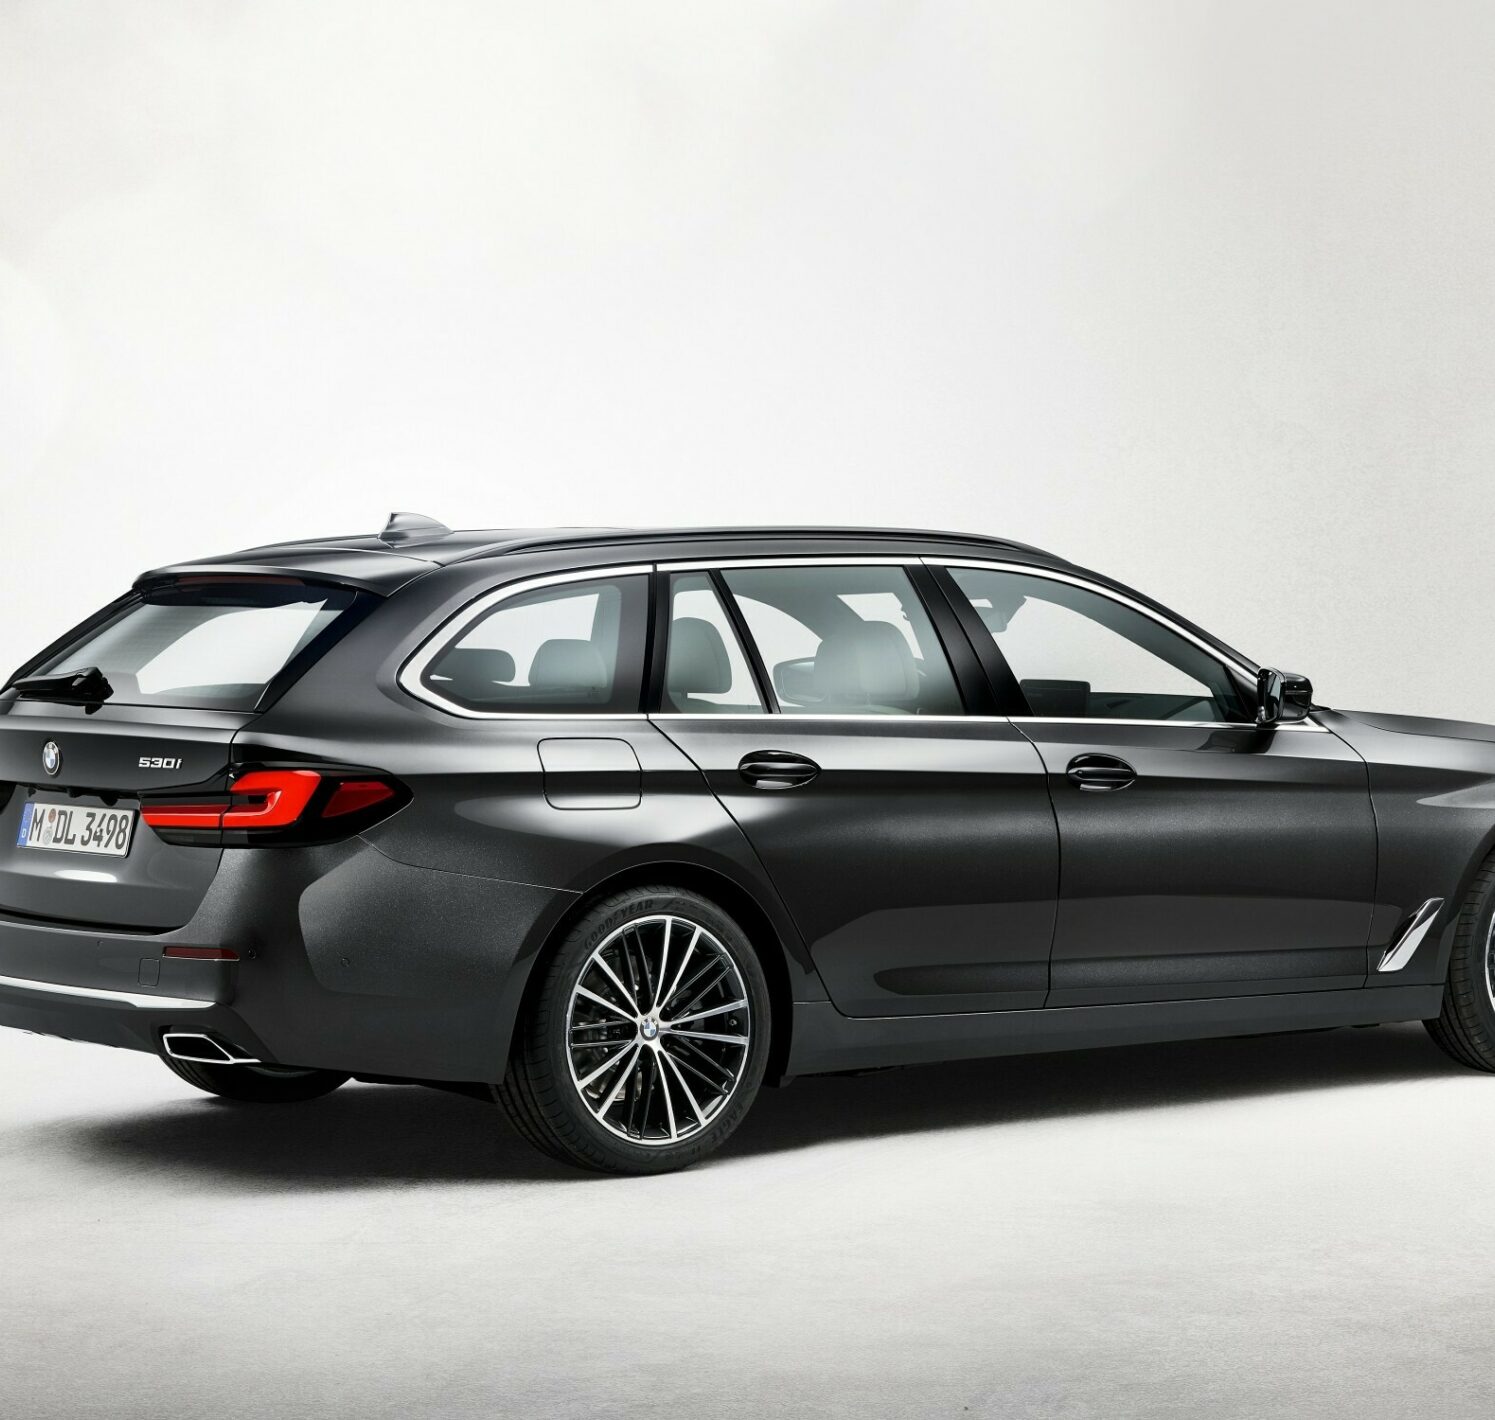 https://autofilter.sk/assets/images/rad-5-touring/gallery/P90389099_lowRes_the-new-bmw-530i-tou-1.jpg - obrazok